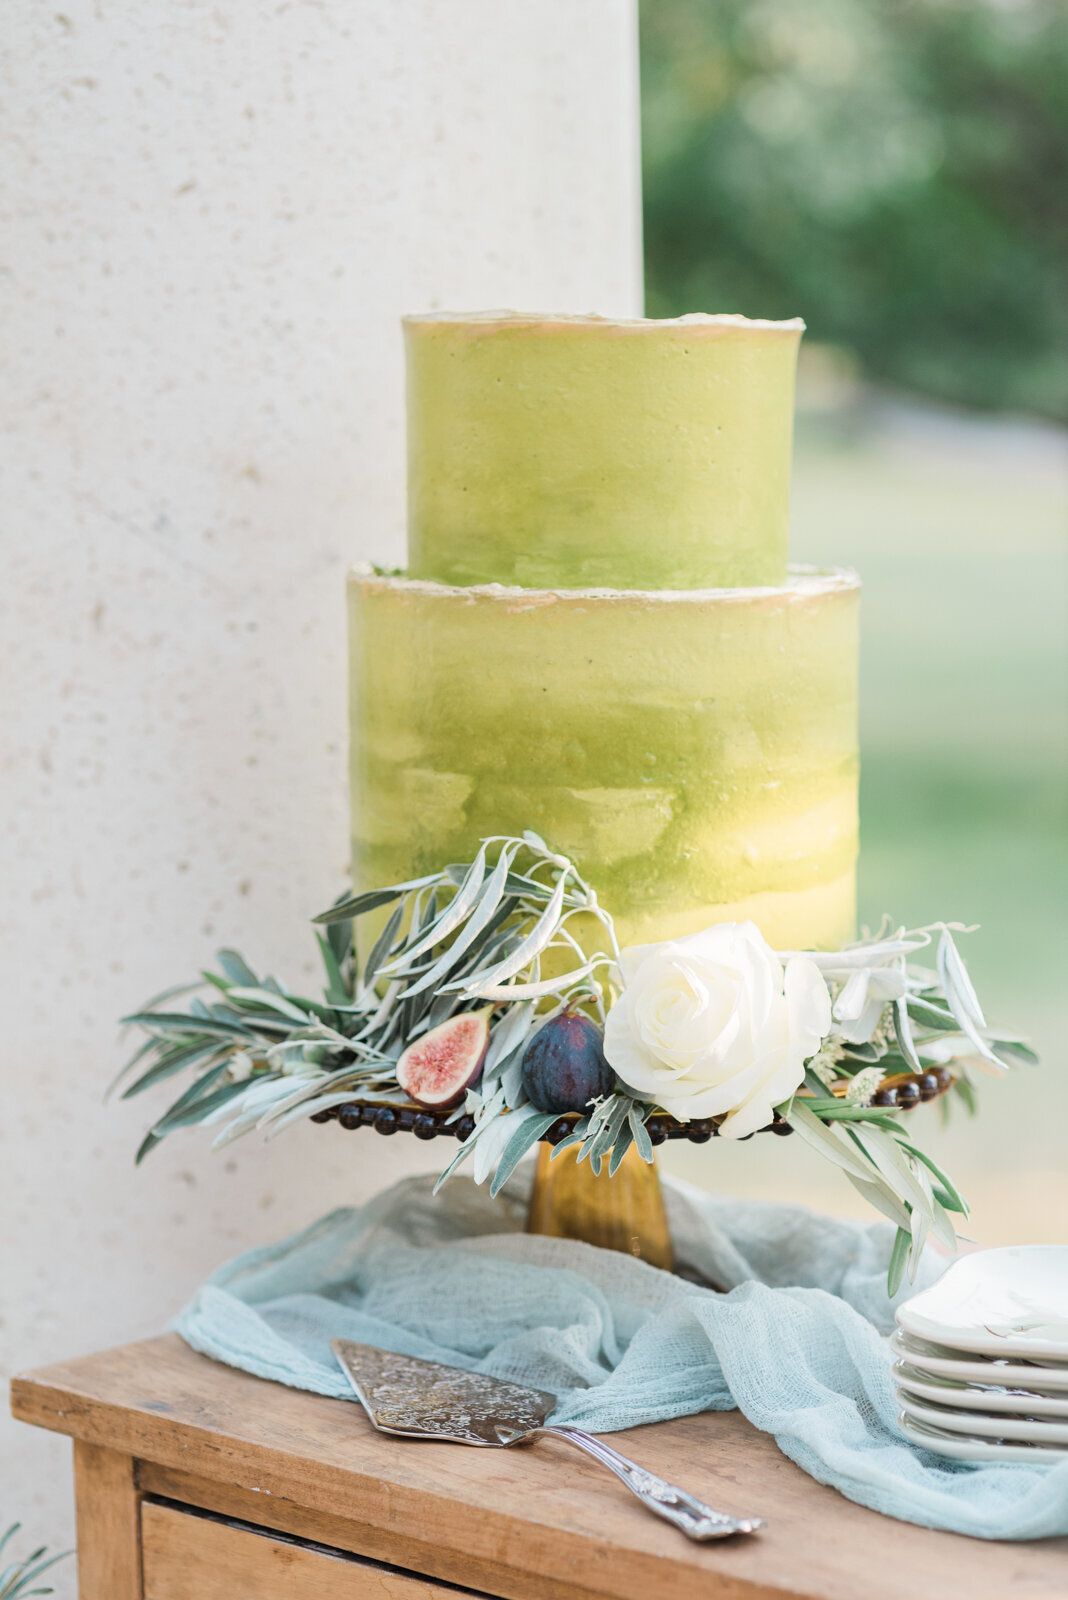 Trendy lime green ombre wedding cake, decorated with white rose, greenery, and fresh pears, by Lemonberry Pastries, contemporary cakes & desserts in Calgary, Alberta, featured on the Brontë Bride Vendor Guide.